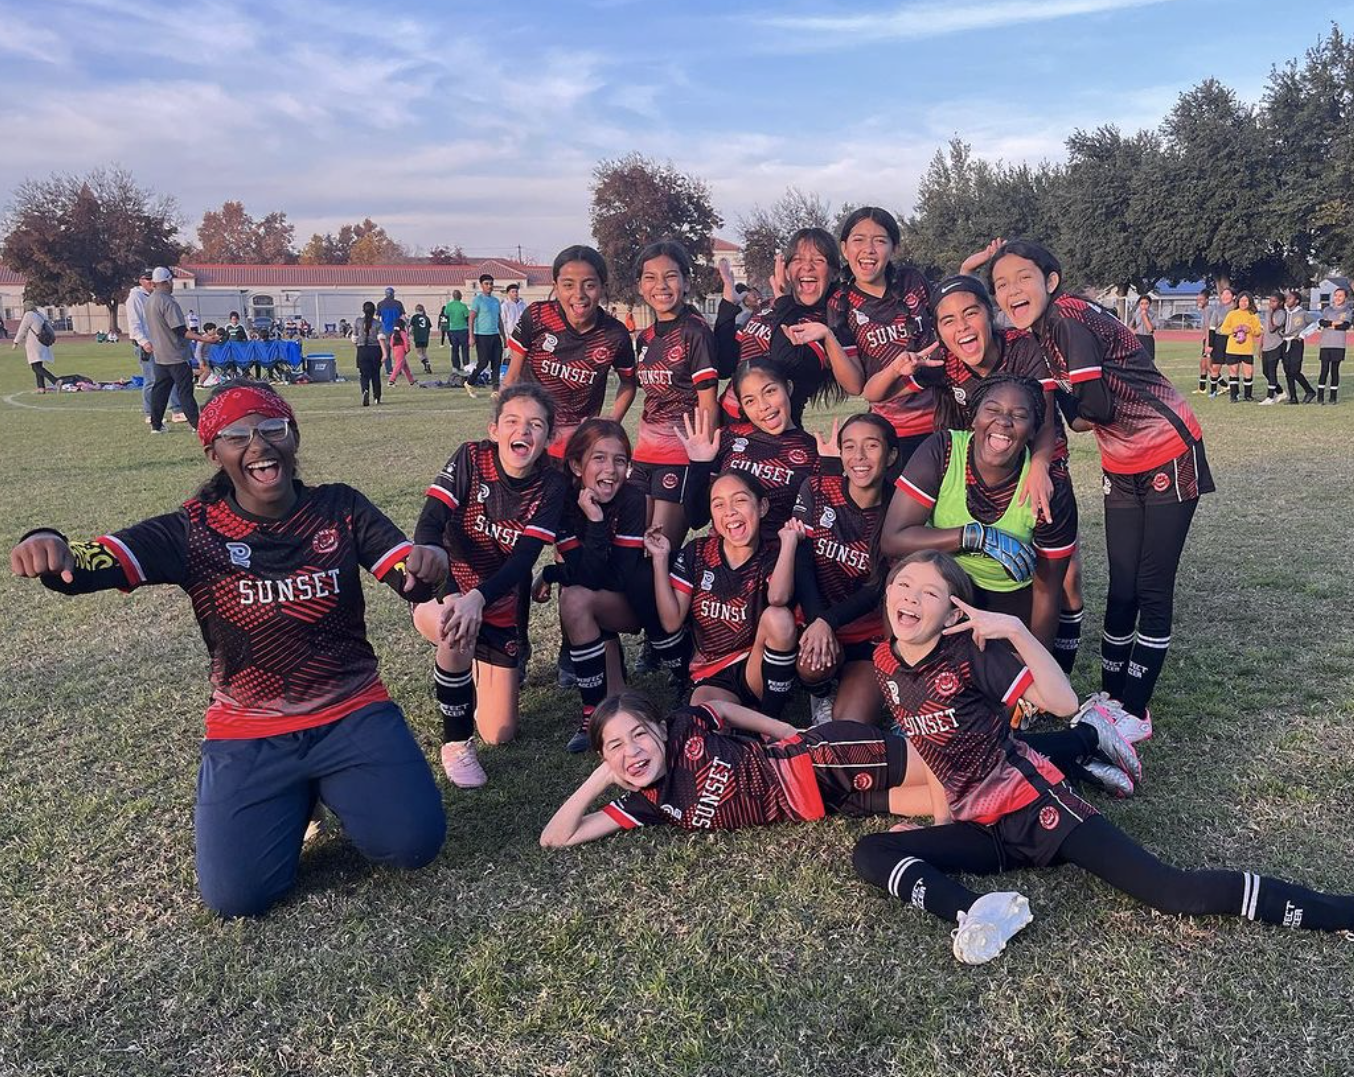 Sunset Elementary Girls Soccer Team Wins Fresno Unified School District Championship